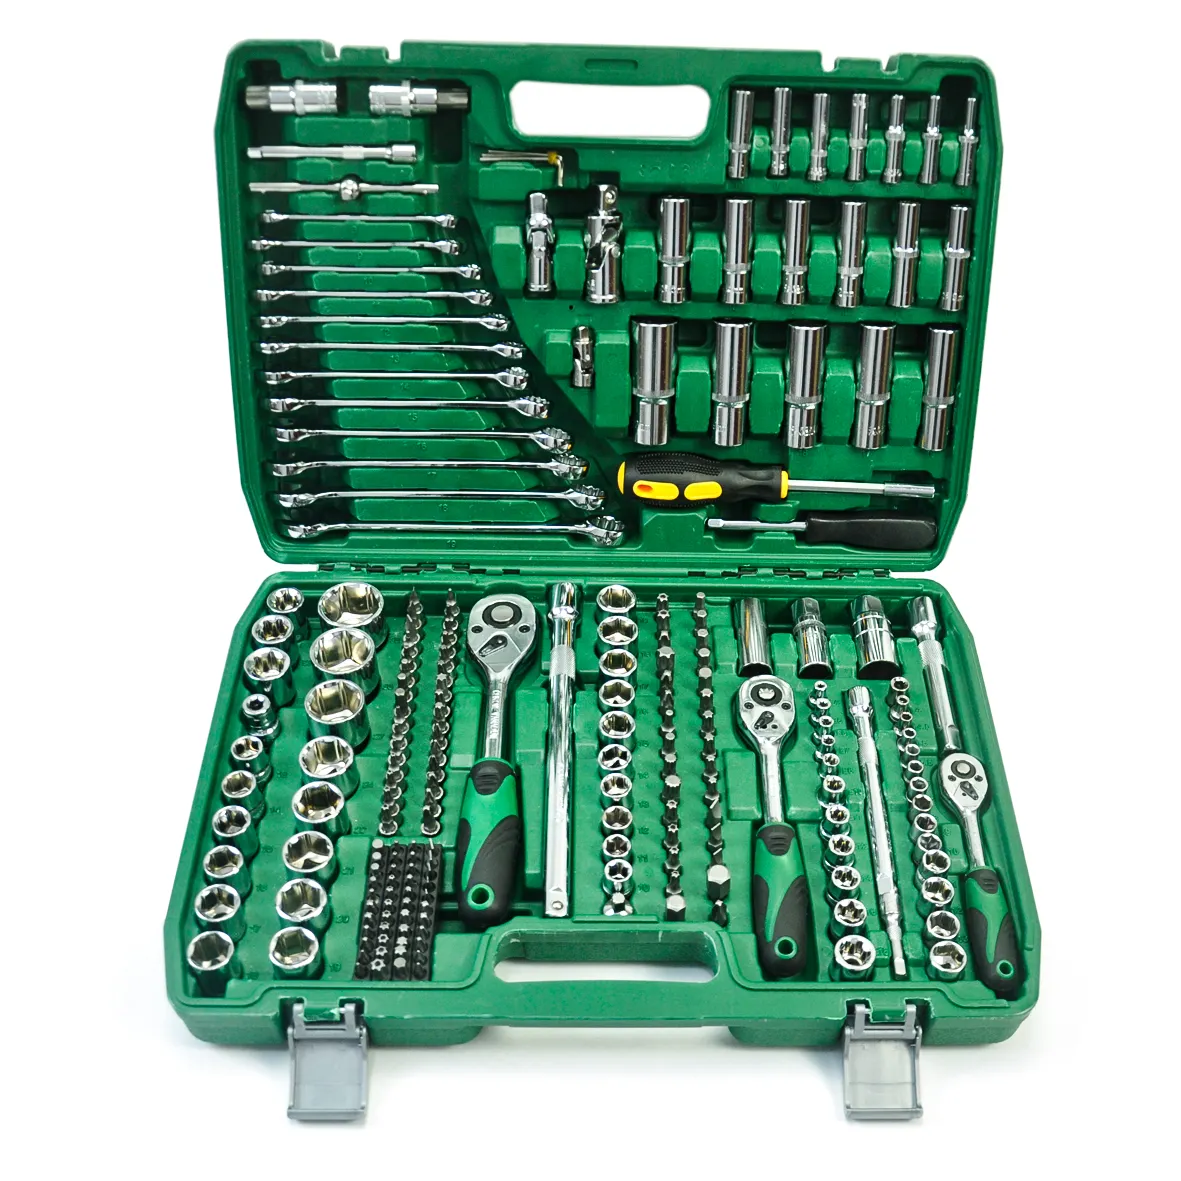 216 PCS Socket Combination Toolbox Set With CRV Material for Car Repaire Hand Tool Sets